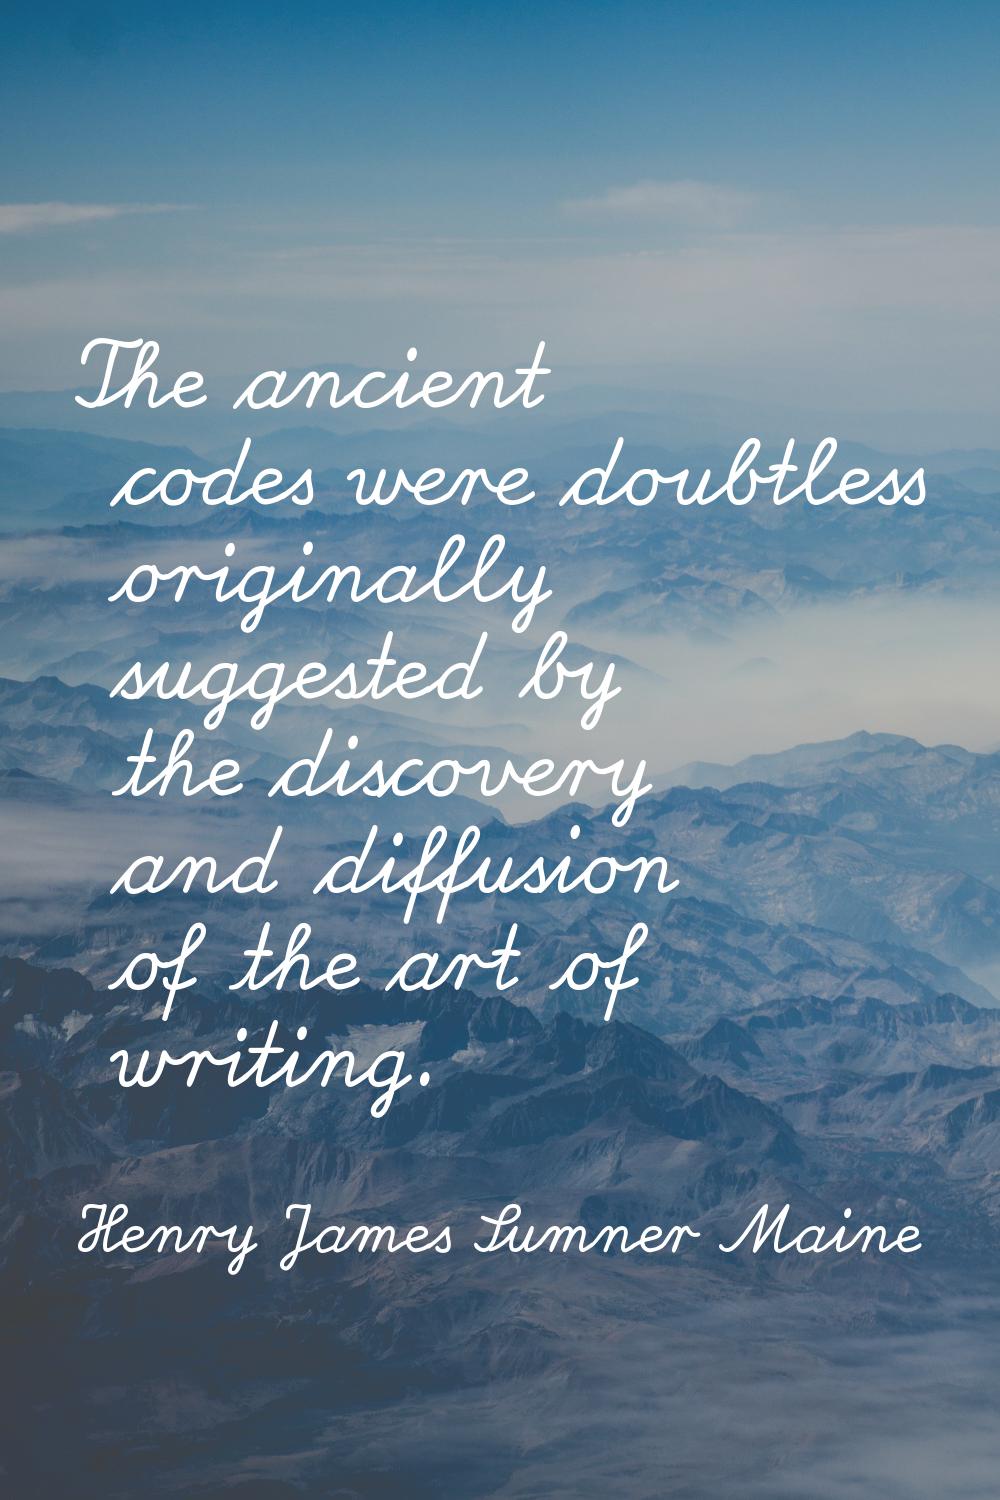 The ancient codes were doubtless originally suggested by the discovery and diffusion of the art of 